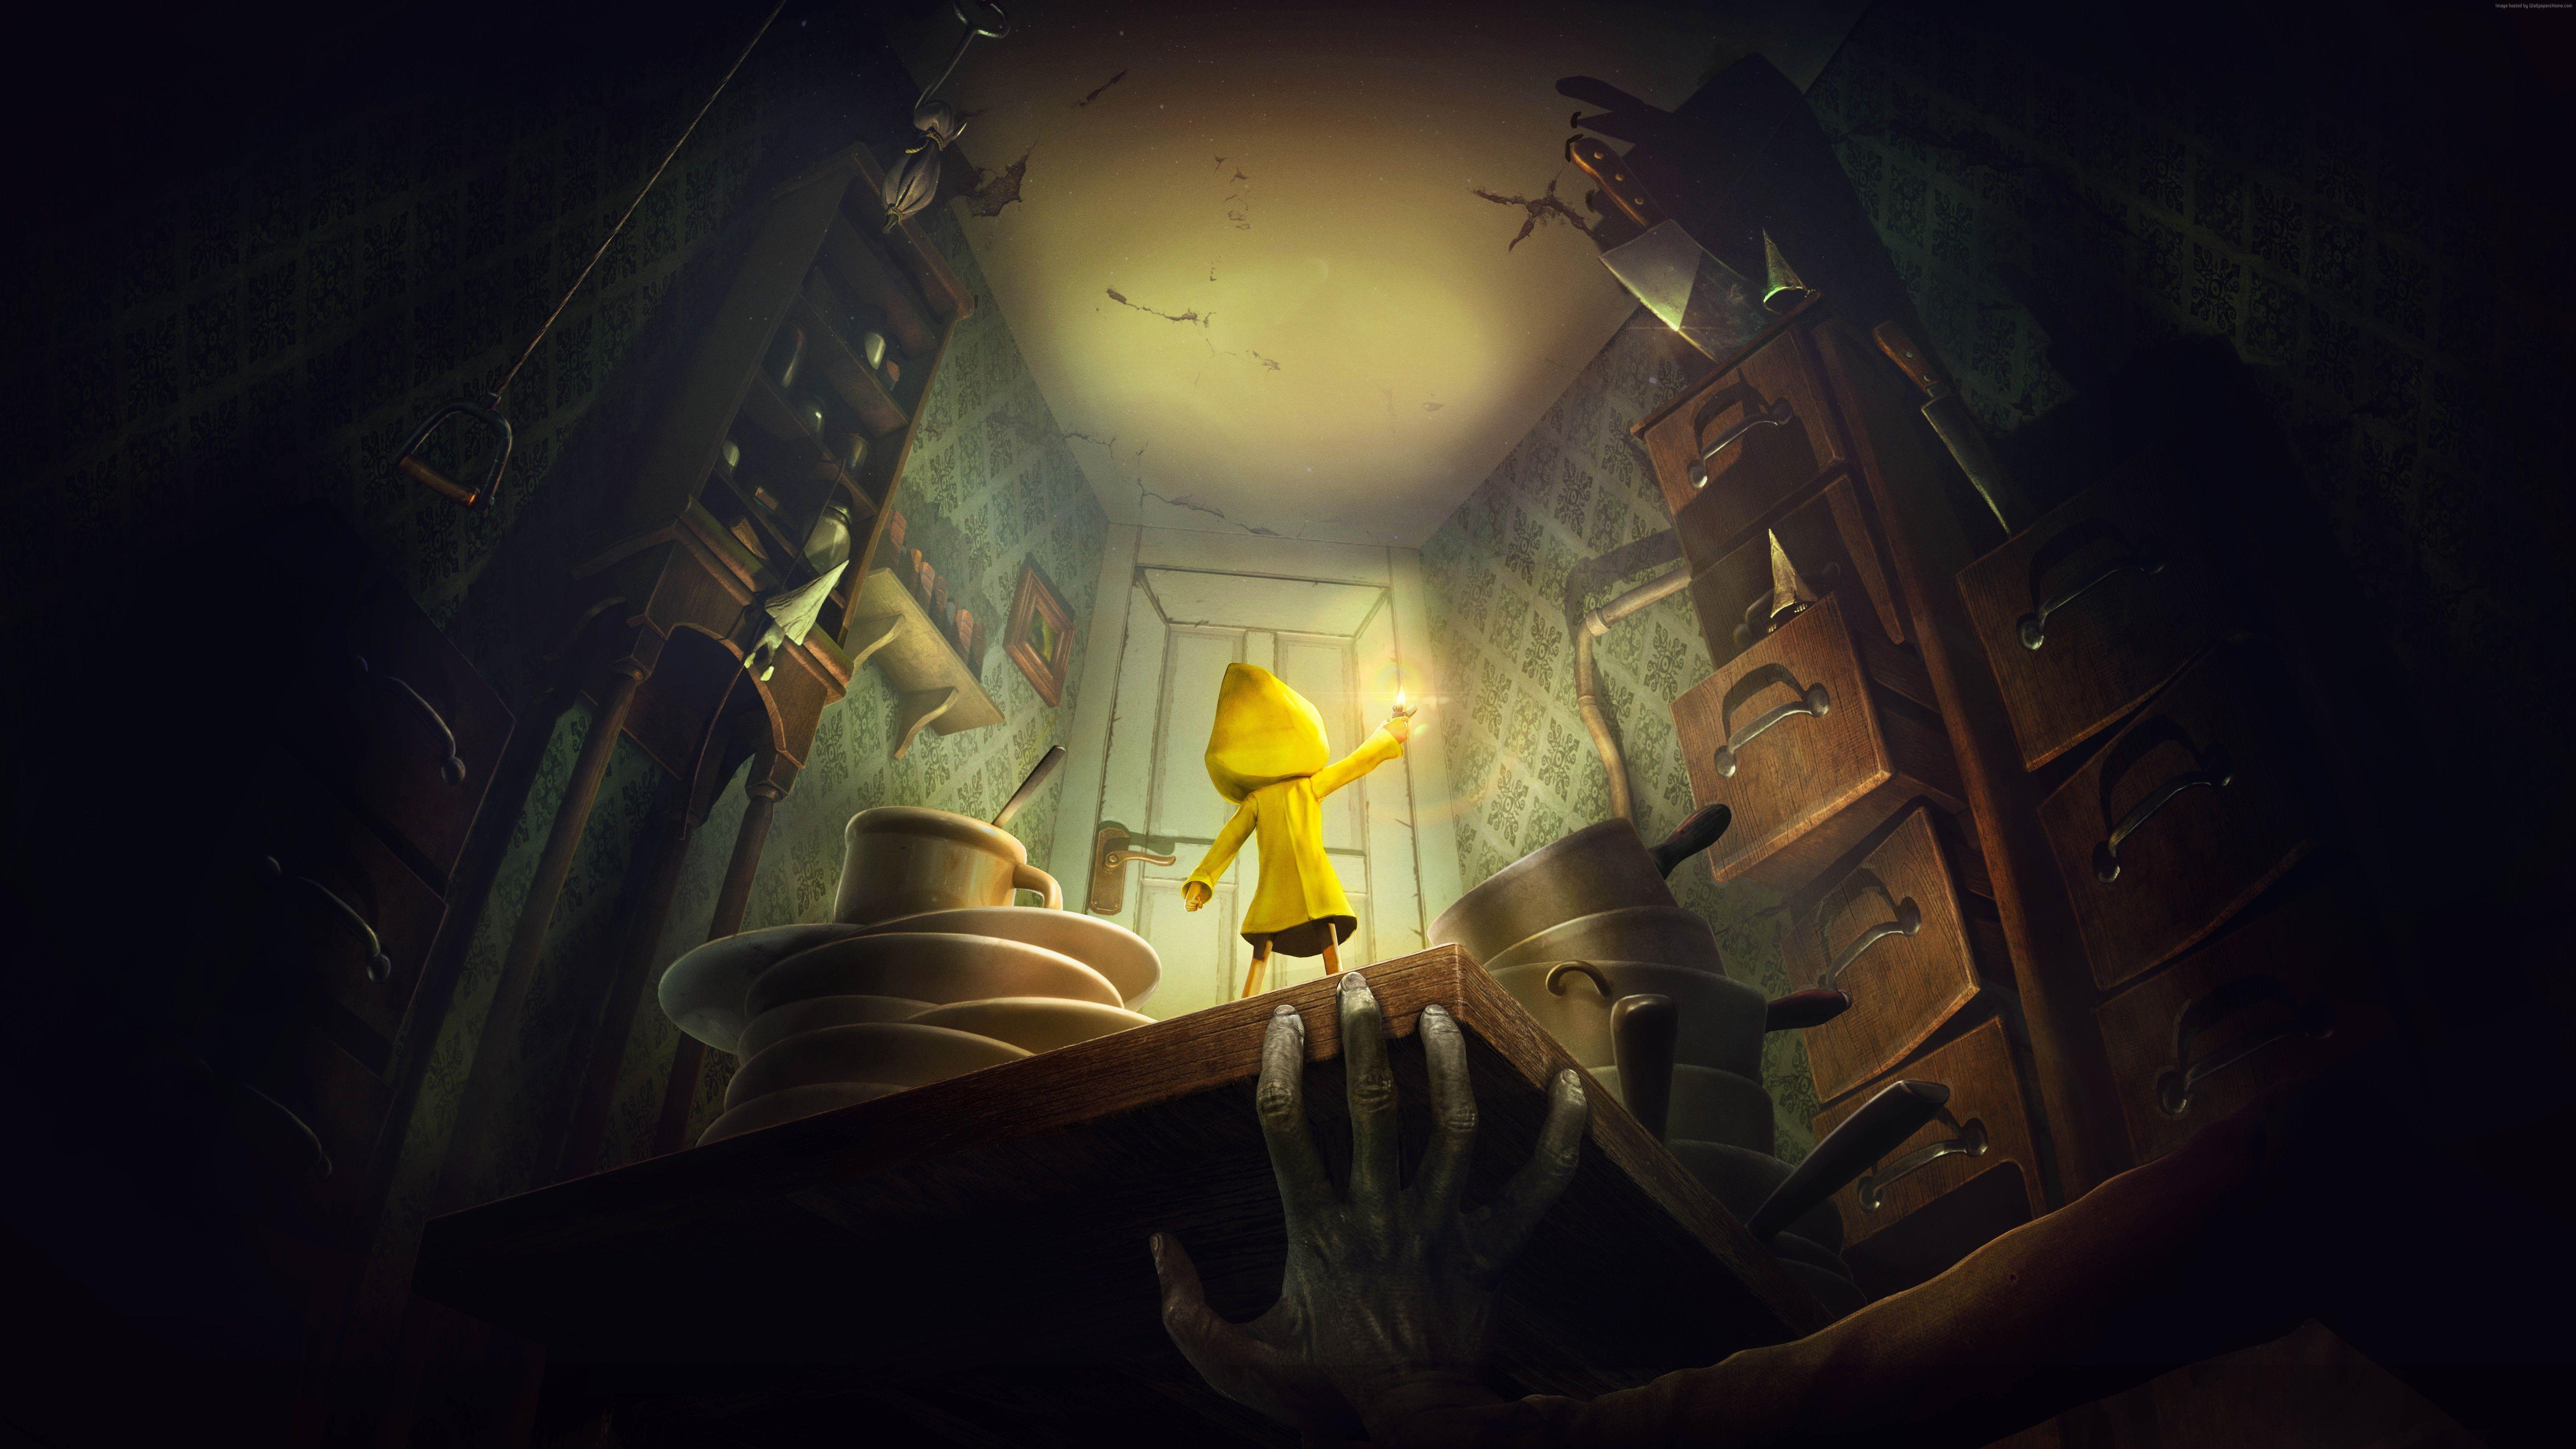 Featured image of post Little Nightmares 2 Desktop Wallpaper Little nightmares ii or little nightmares 2 is a video game released in february 11th 2021 for ps4 xbox one switch and pc and later in 2021 for ps5 xbox series x s and stadia